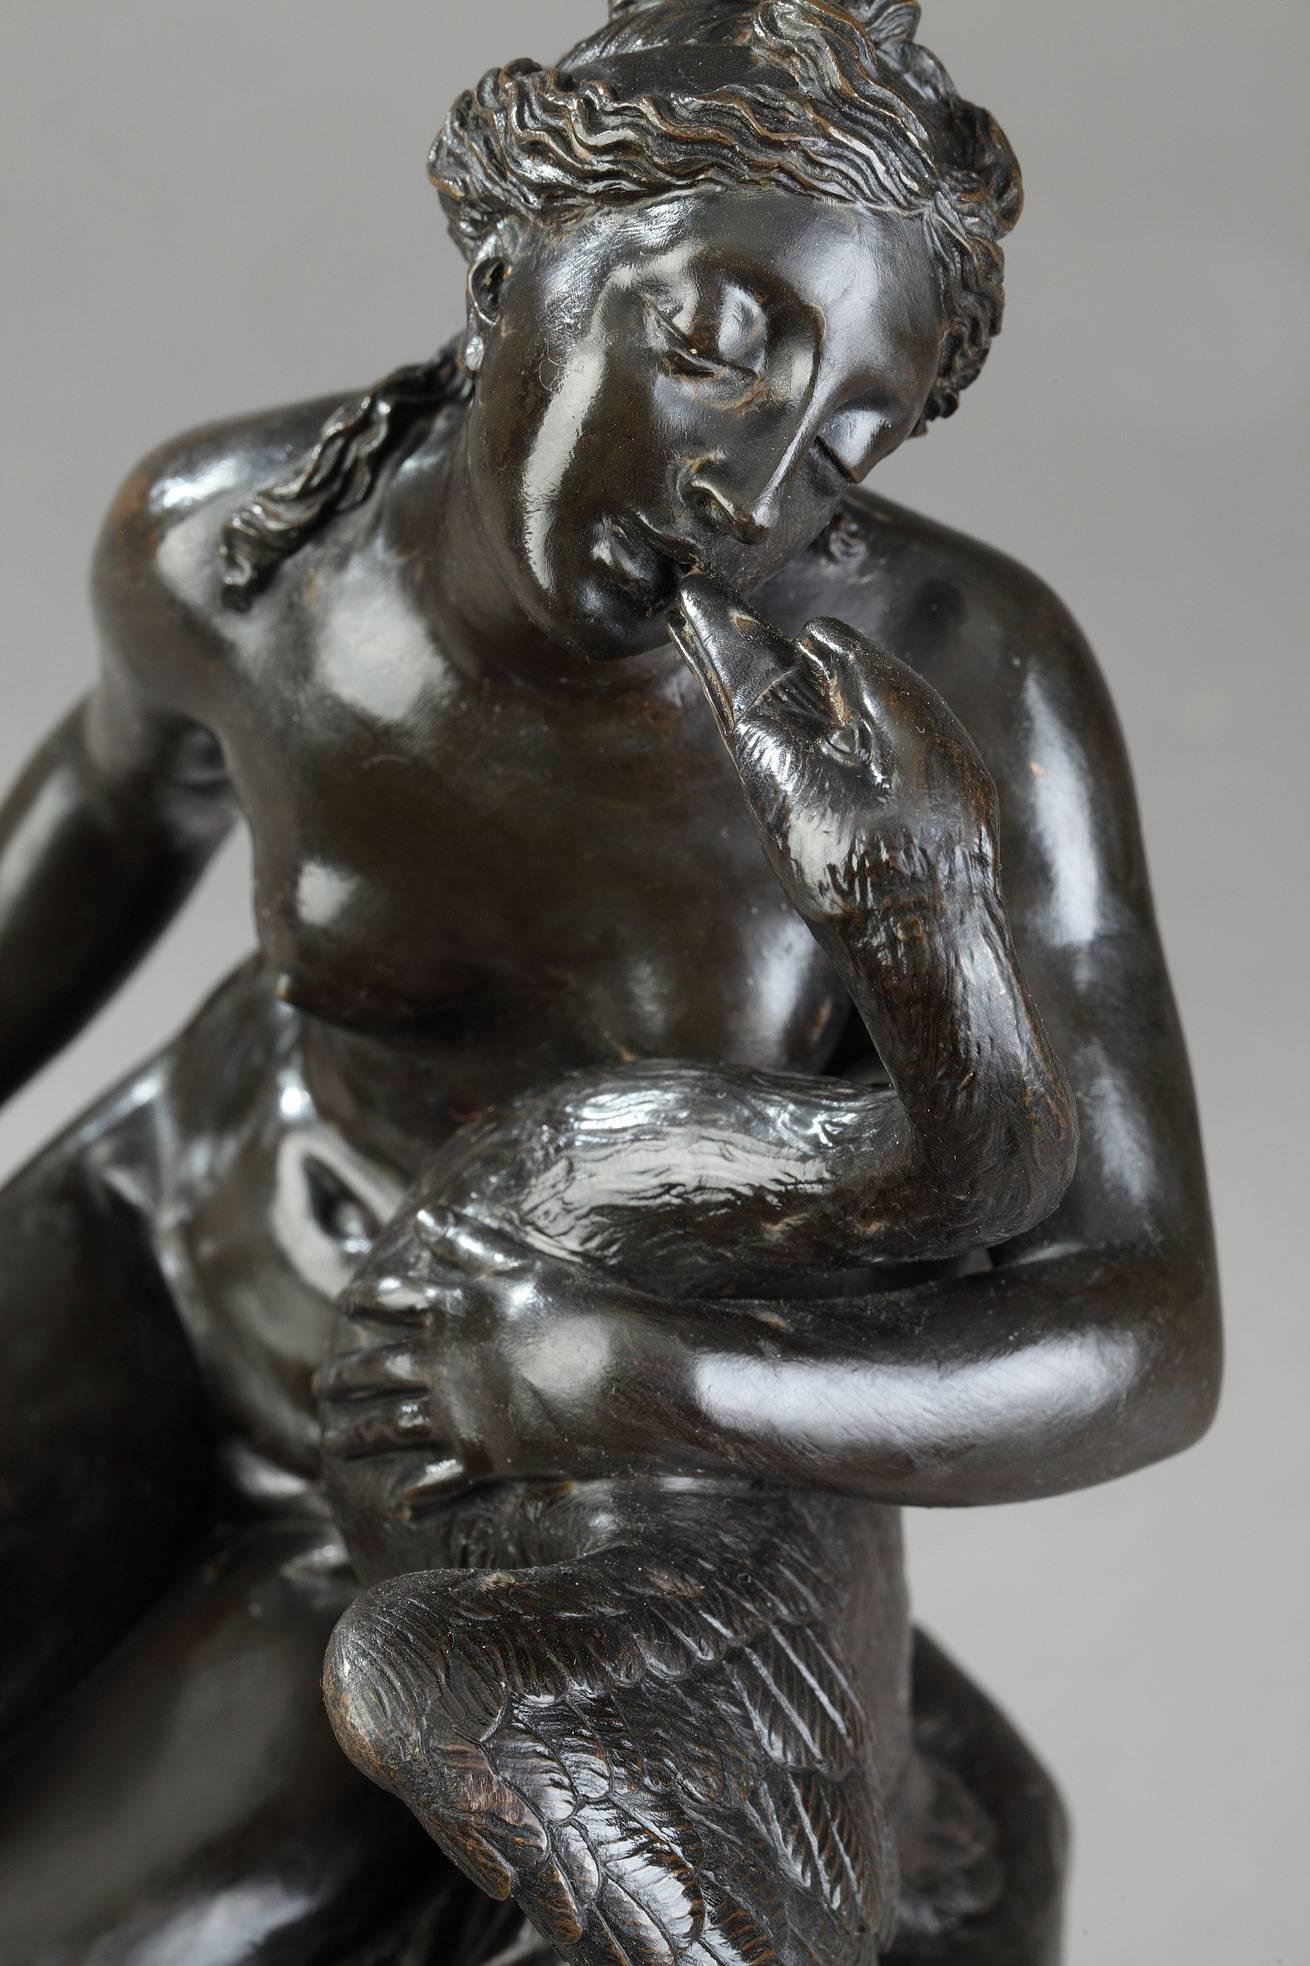 Early 19th century bronze mythological group featuring a love-making scene with a nude seated Leda cuddling the Swan. In Greek mythology, Leda was admired by Zeus, who seduced her in the guise of a swan. As a swan, he fell into her arms for